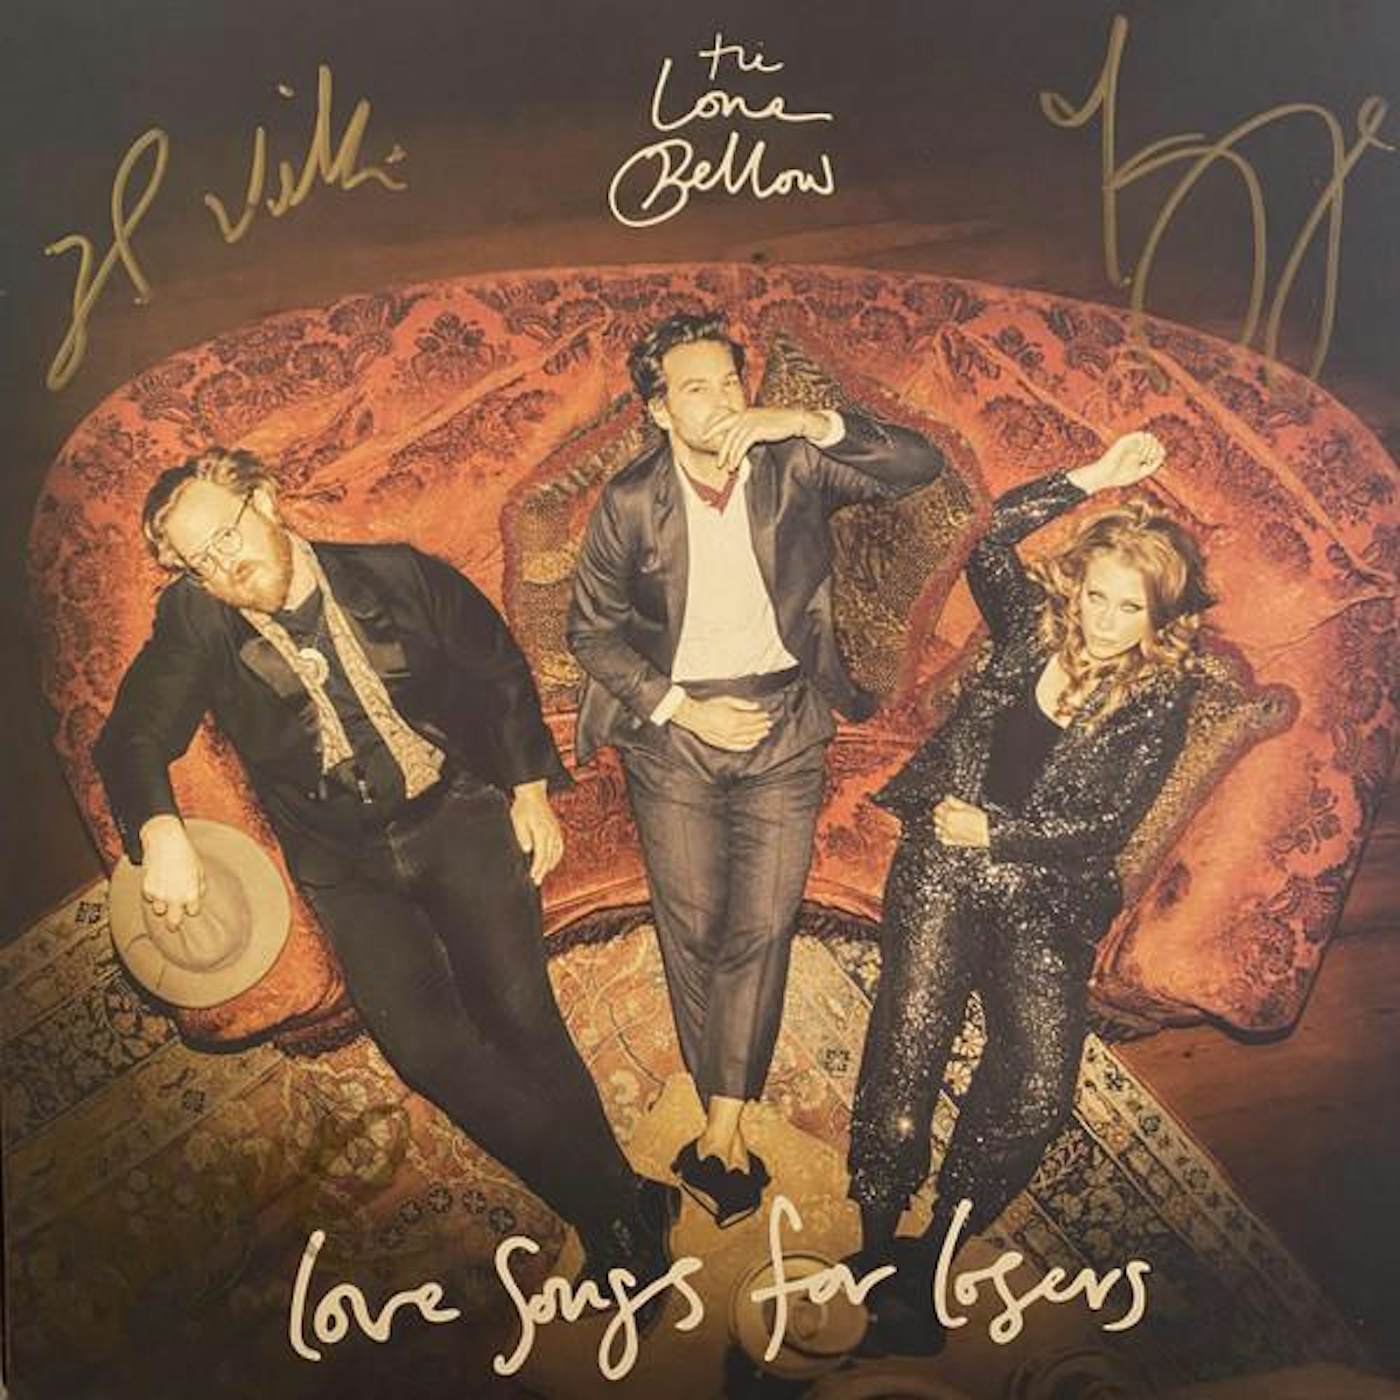 The Lone Bellow LOVE SONGS FOR LOSERS Vinyl Record